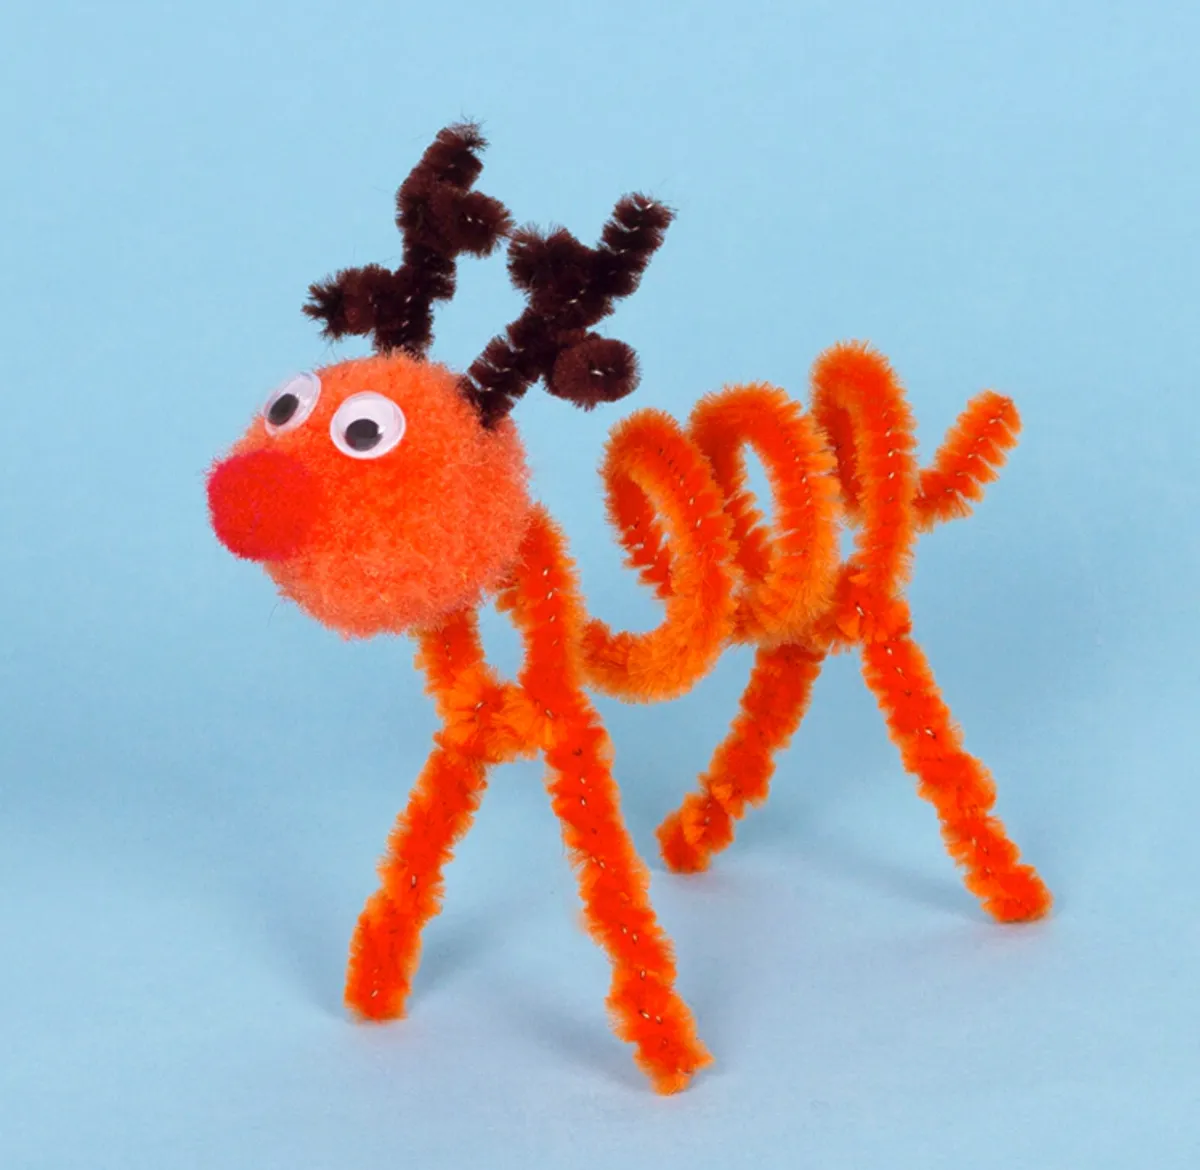 12 Fun Pipe Cleaner Crafts - diy Thought